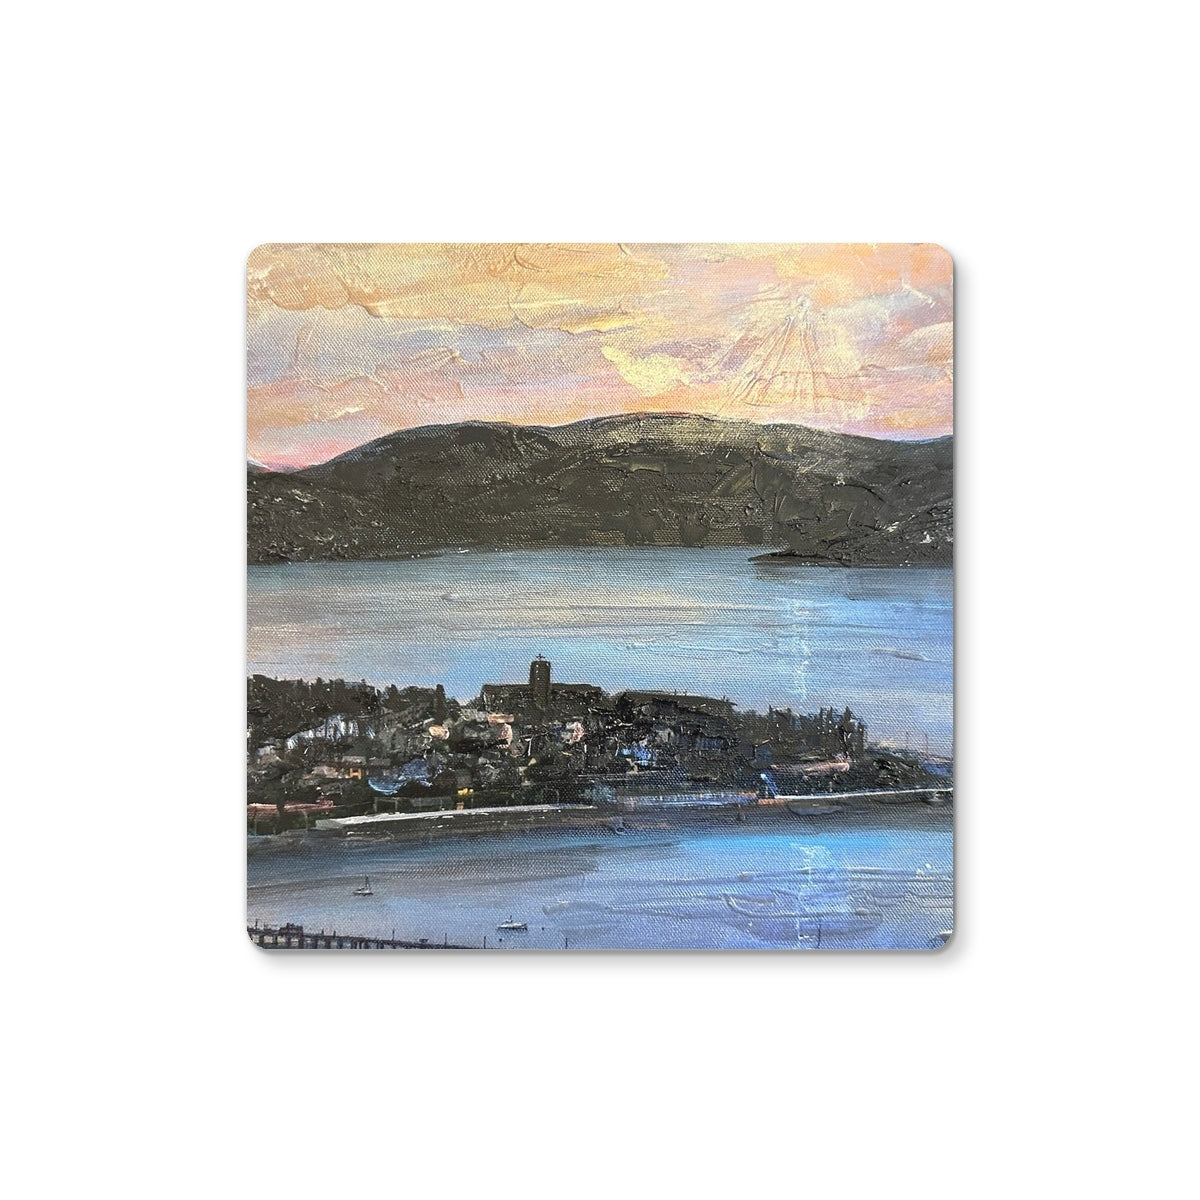 From Lyle Hill Art Gifts Coaster-Homeware-River Clyde Art Gallery-2 Coasters-Paintings, Prints, Homeware, Art Gifts From Scotland By Scottish Artist Kevin Hunter